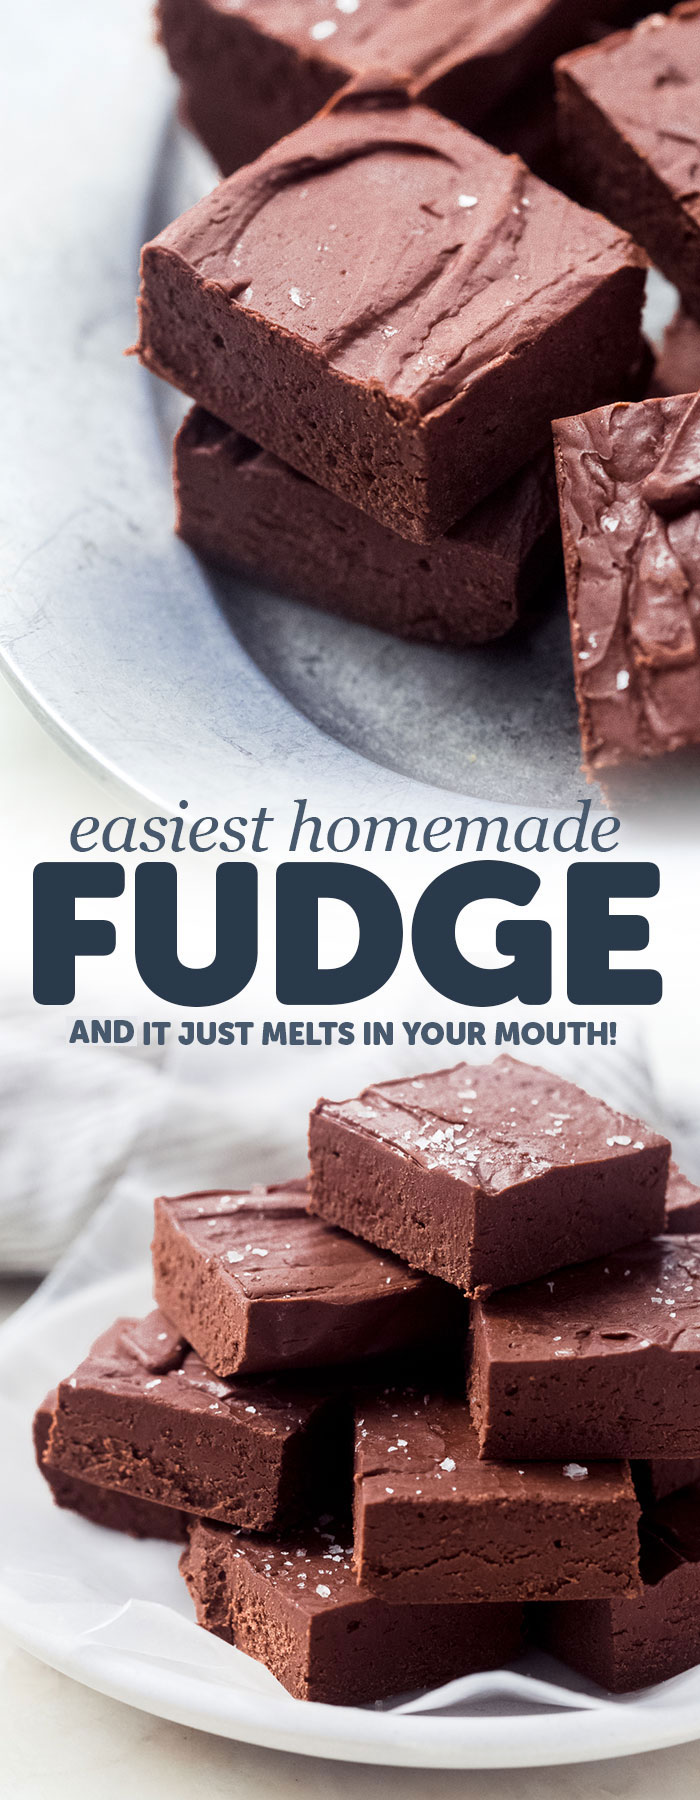 Melt in Your Mouth Homemade Fudge - delicious squares that take just 15 minutes of hands on time! Homemade fudge is a great gift for family and friends! #fudge #fudgerecipe #homemadefudge #chocolatefudge | Littlespicejar.com